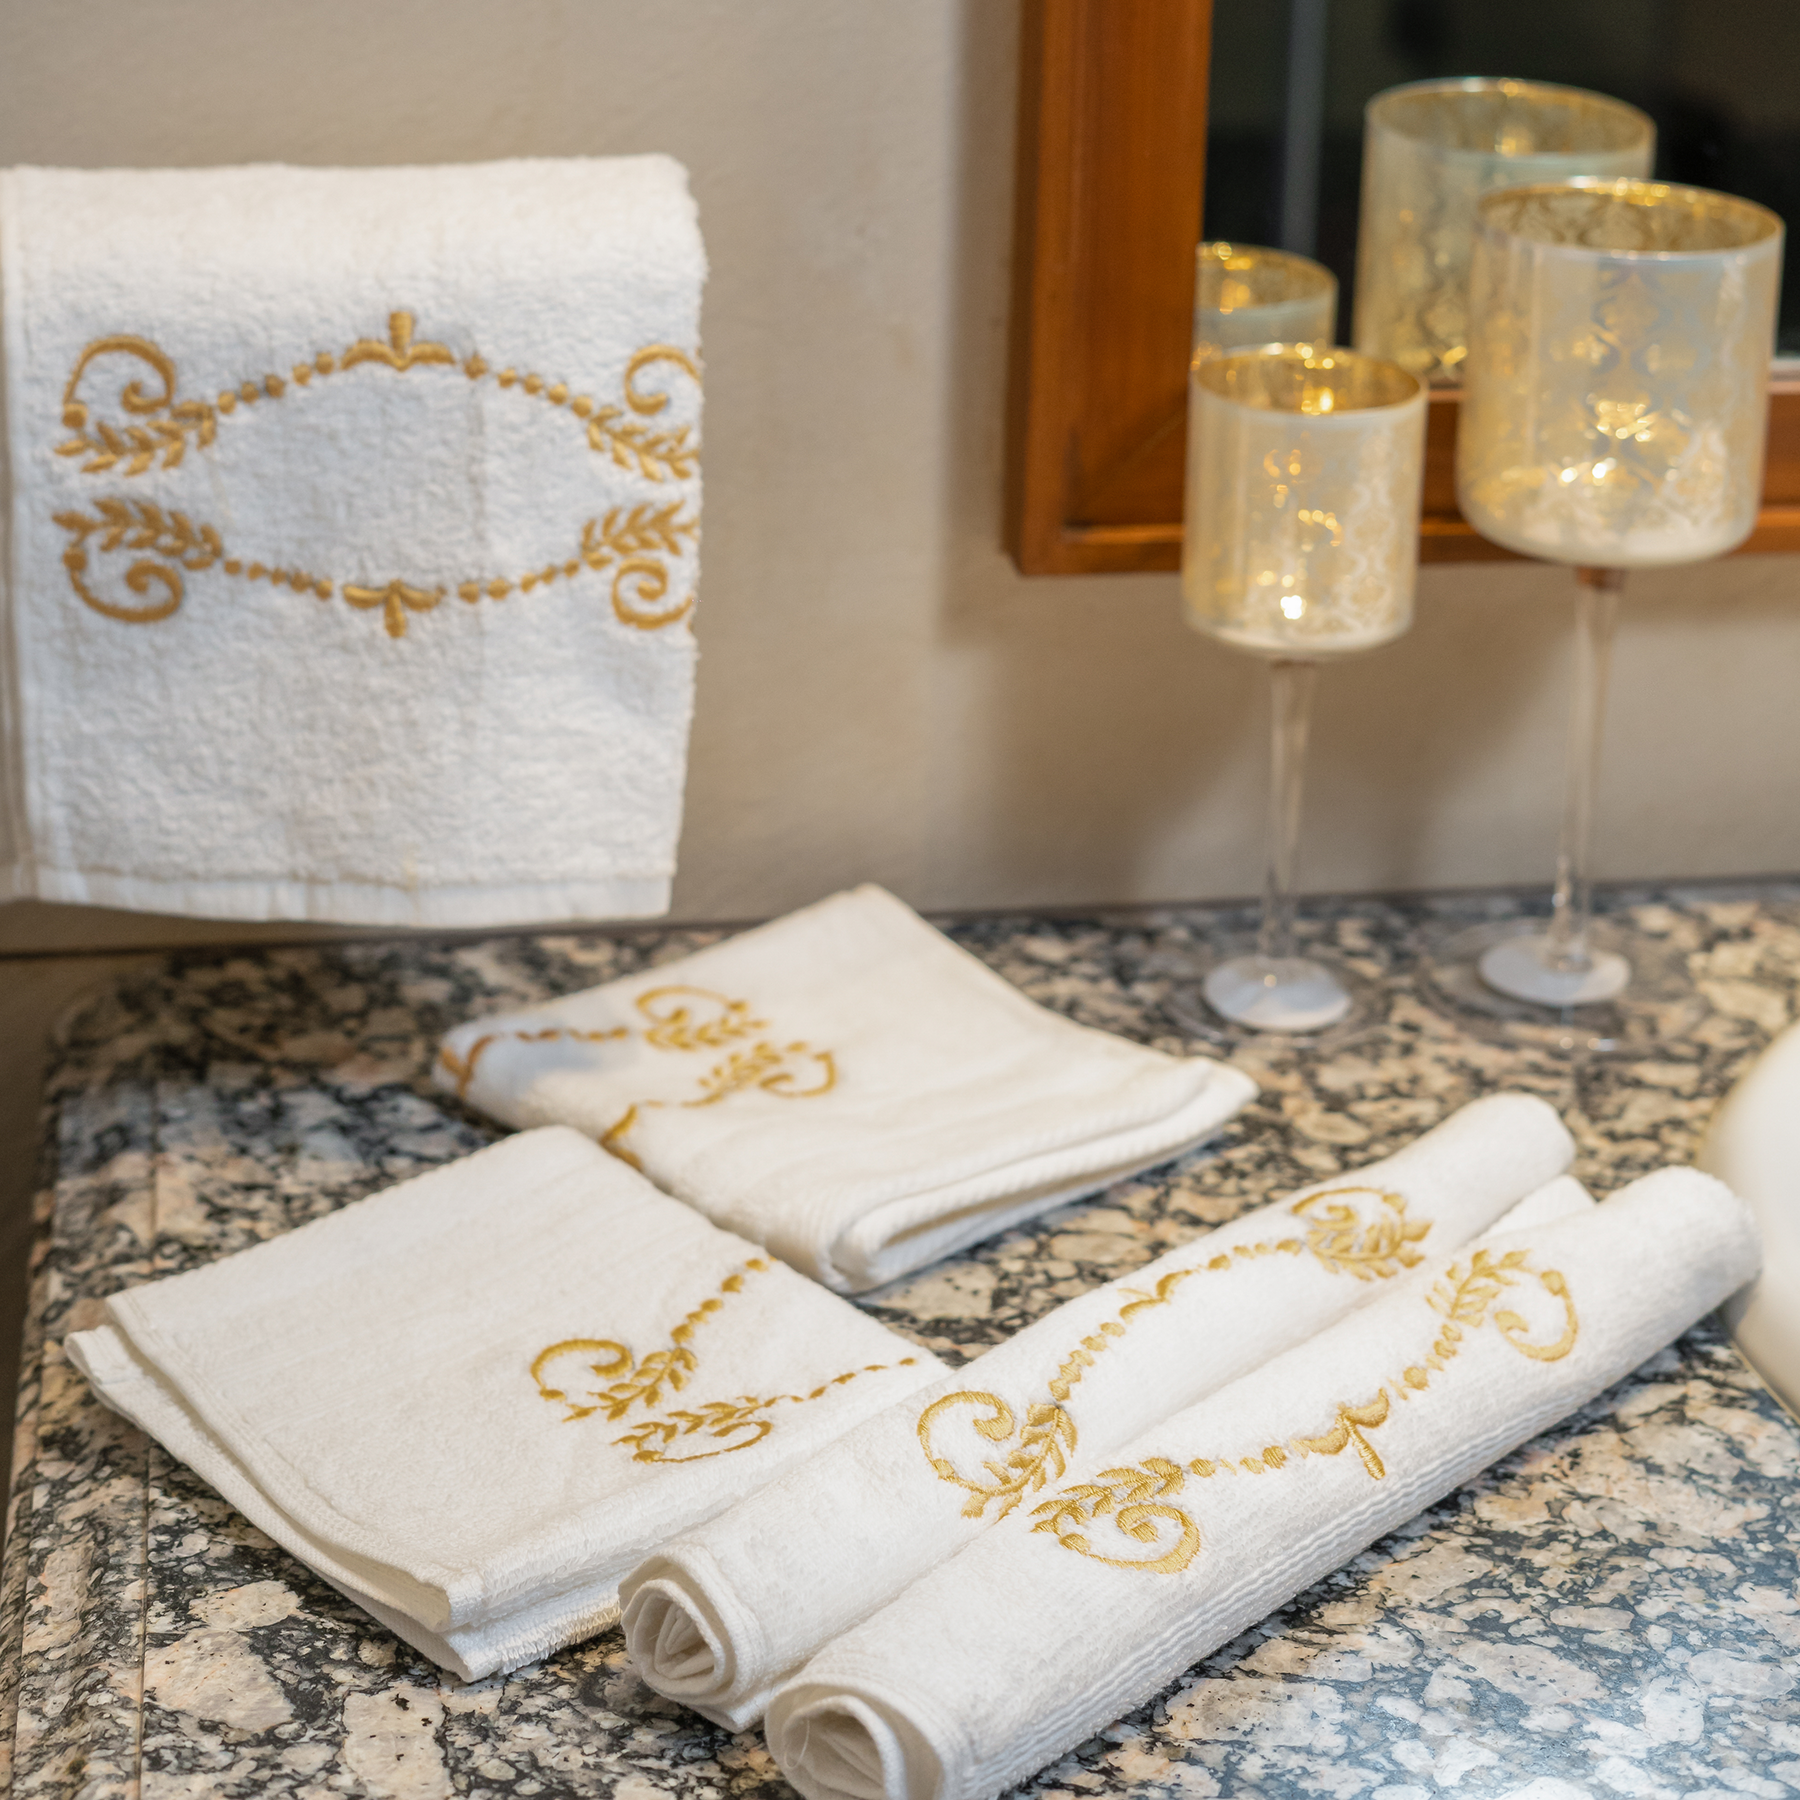 The Luxelife White Face Towel with Golden Embroidered